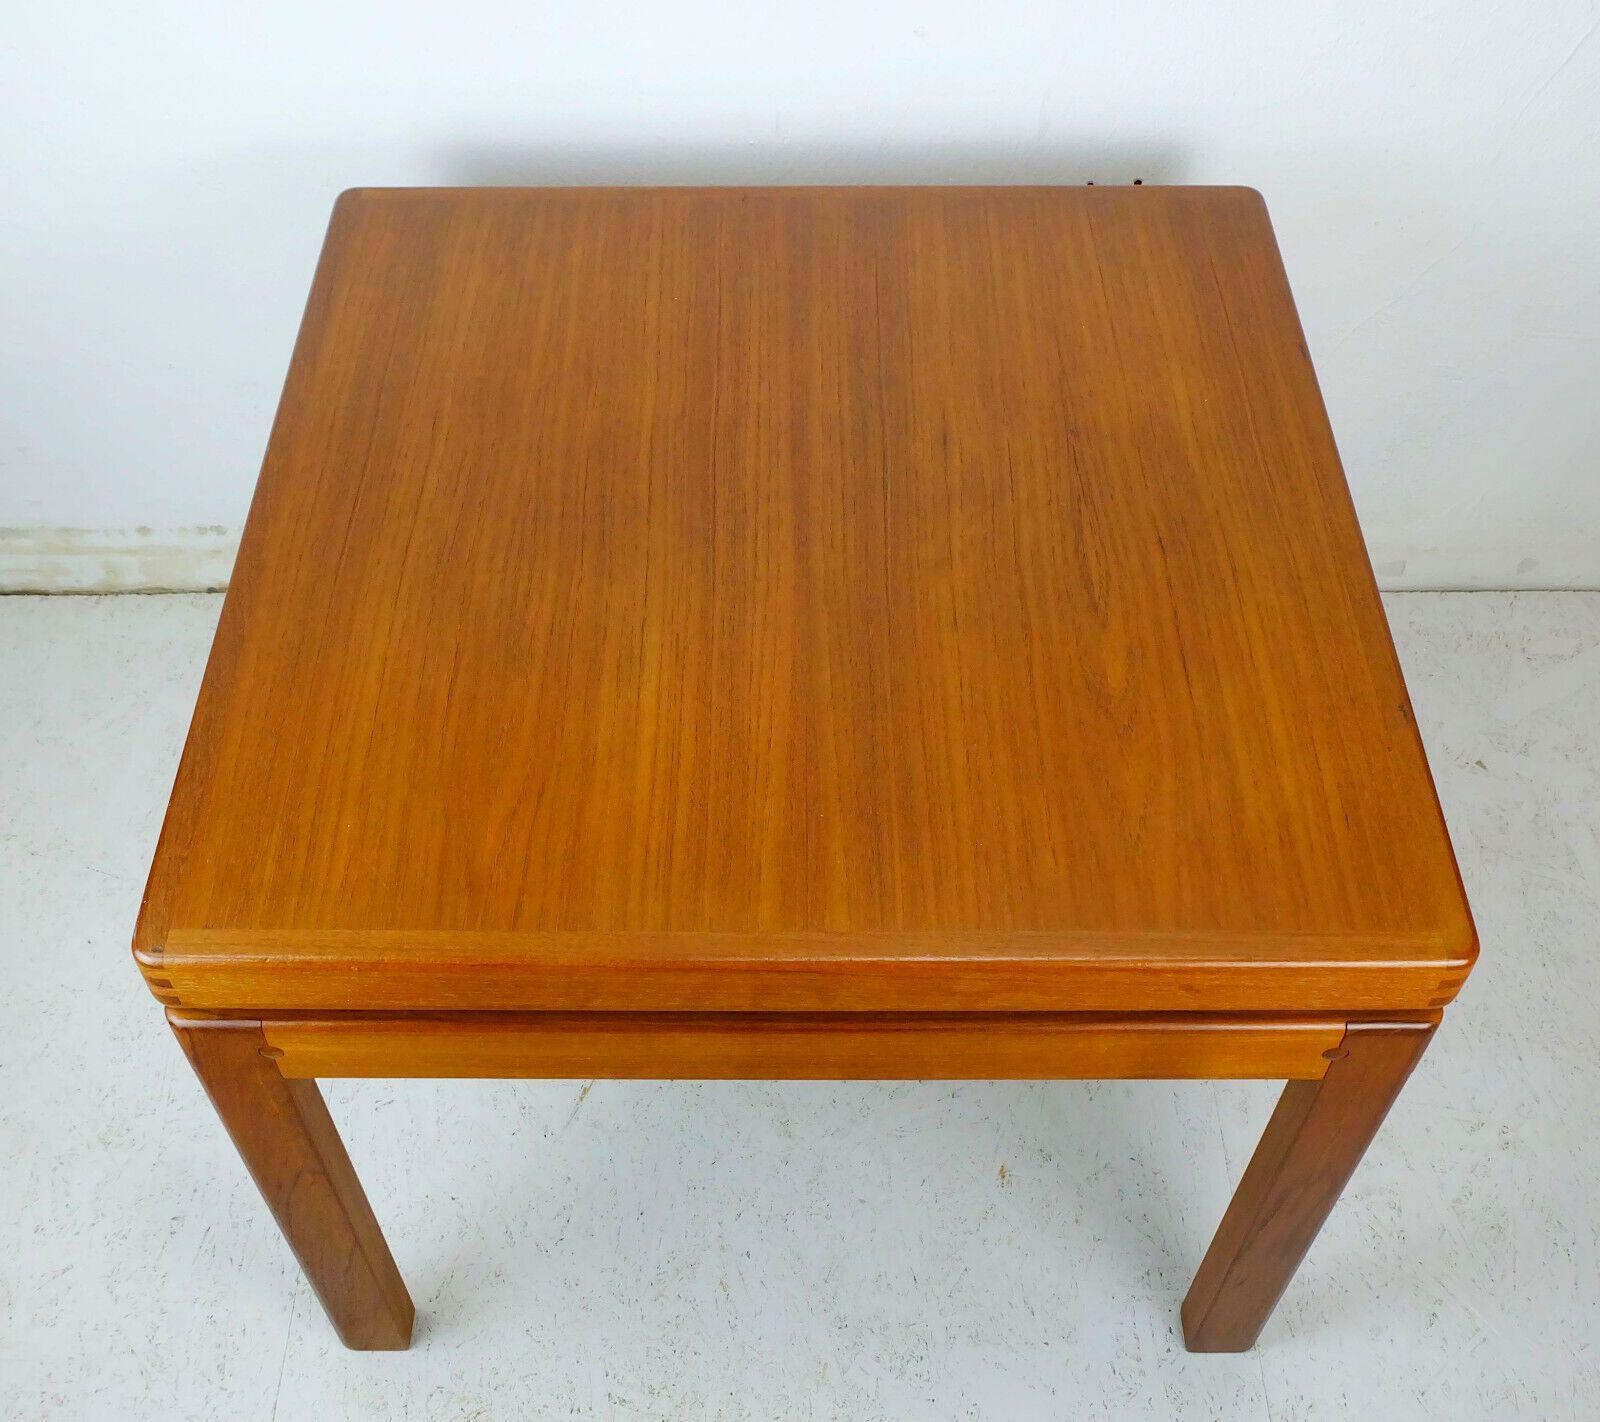 Danish Modern Coffee Table Side Table Teak Made in Denmark, 1970s In Good Condition For Sale In Mannheim, DE